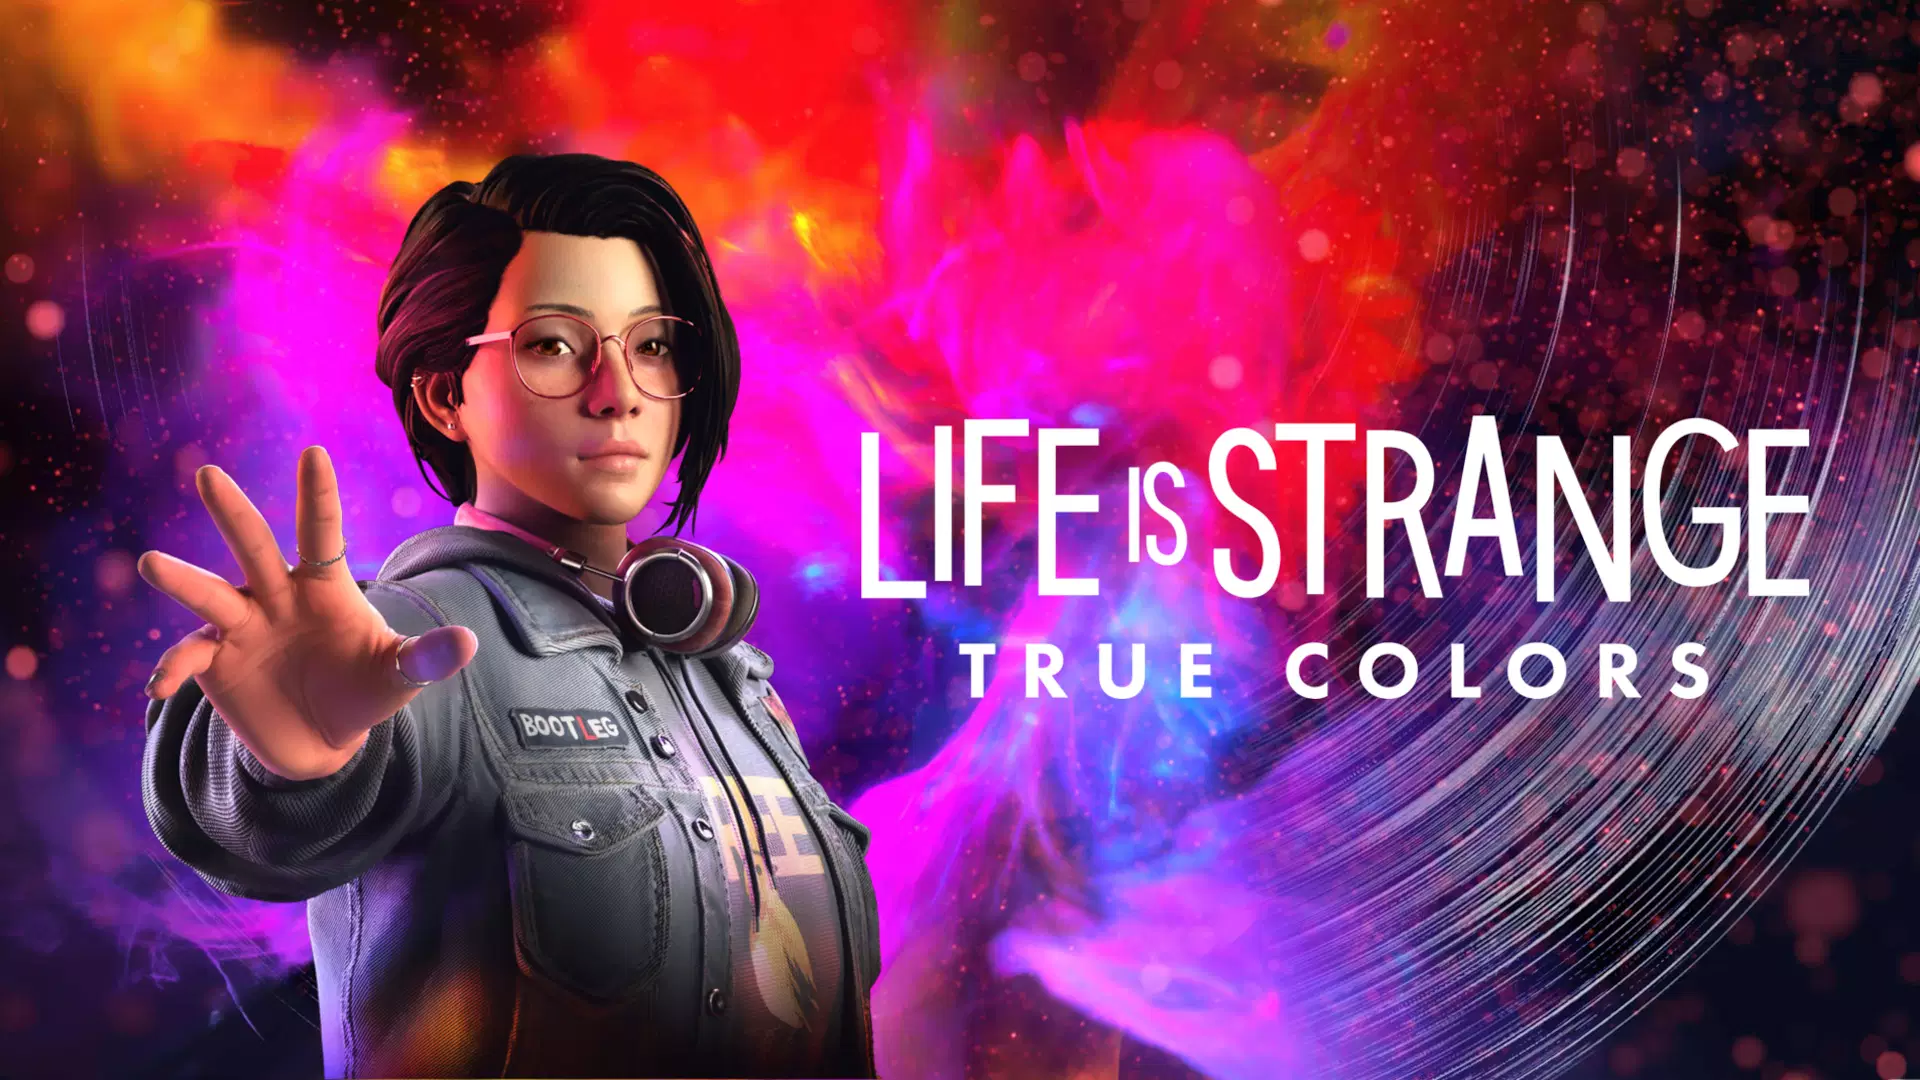 The authors of Life is Strange: True Colors are not going to release the next game based on the episodes